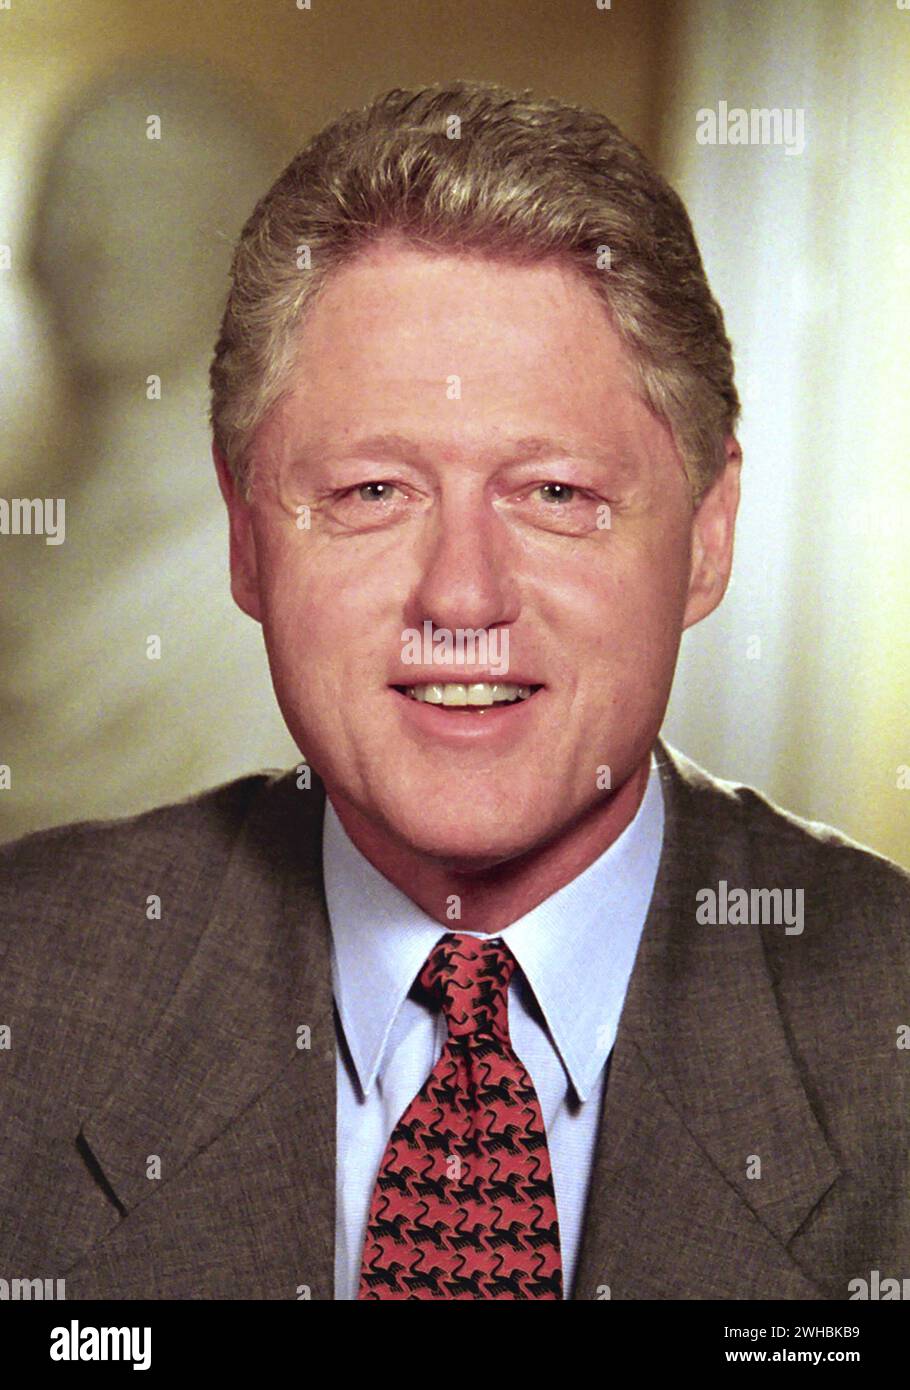 Portrait photograph of President Clinton in the Cabinet Room of the White House, 1999 Stock Photo